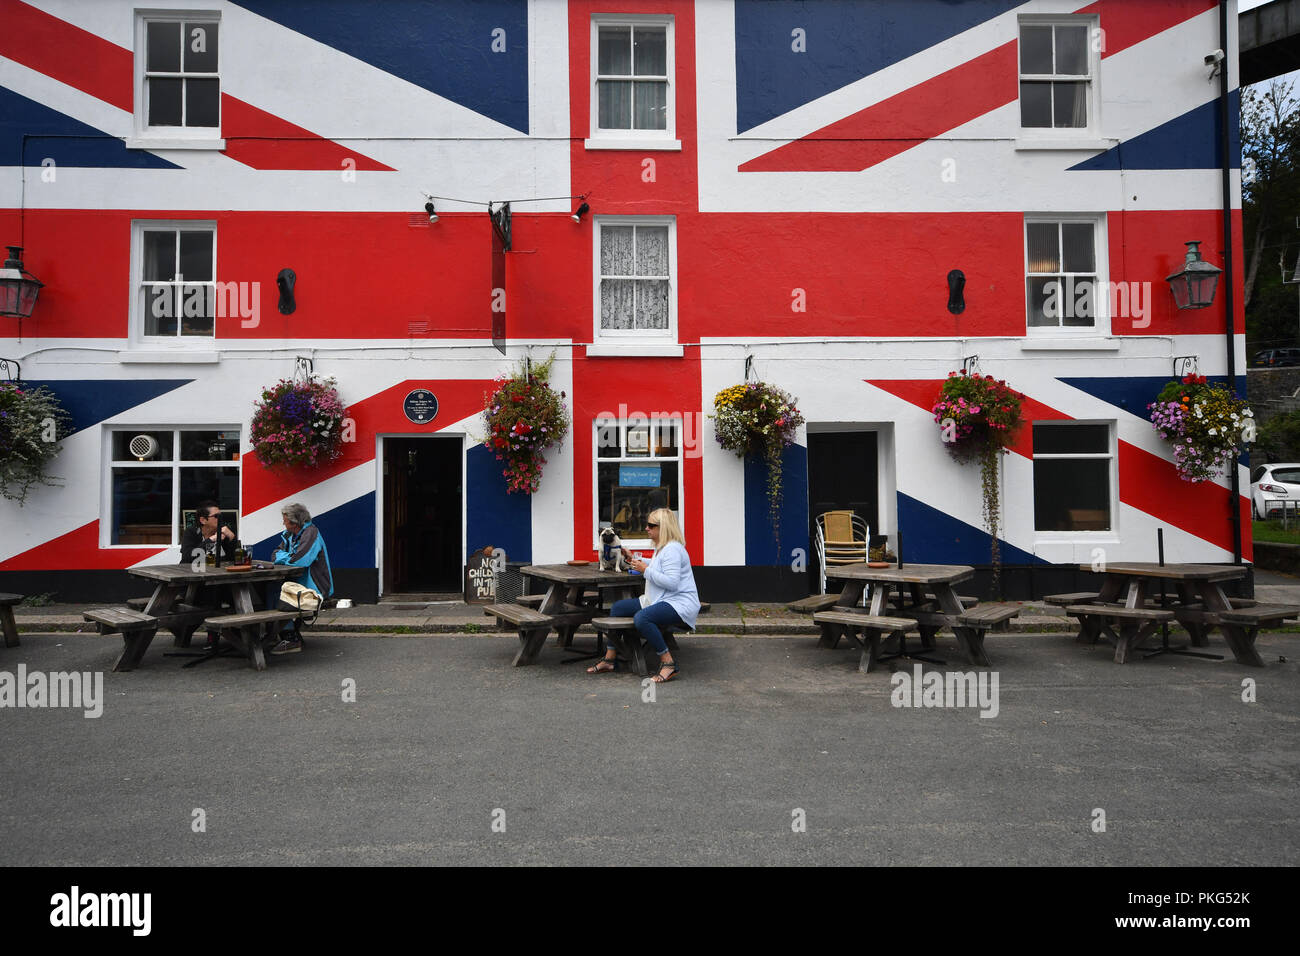 Saltash, Cornwall, UK. 13th Setpember 2018. UK Weather. There were clouds in the sky over the Union Inn at Saltash this lunchtime for lunchtime drinkers,   as the UK Government in London were in meetings finalising the information for the no deal outcome for Brexit. Credit: Simon Maycock/Alamy Live News Stock Photo